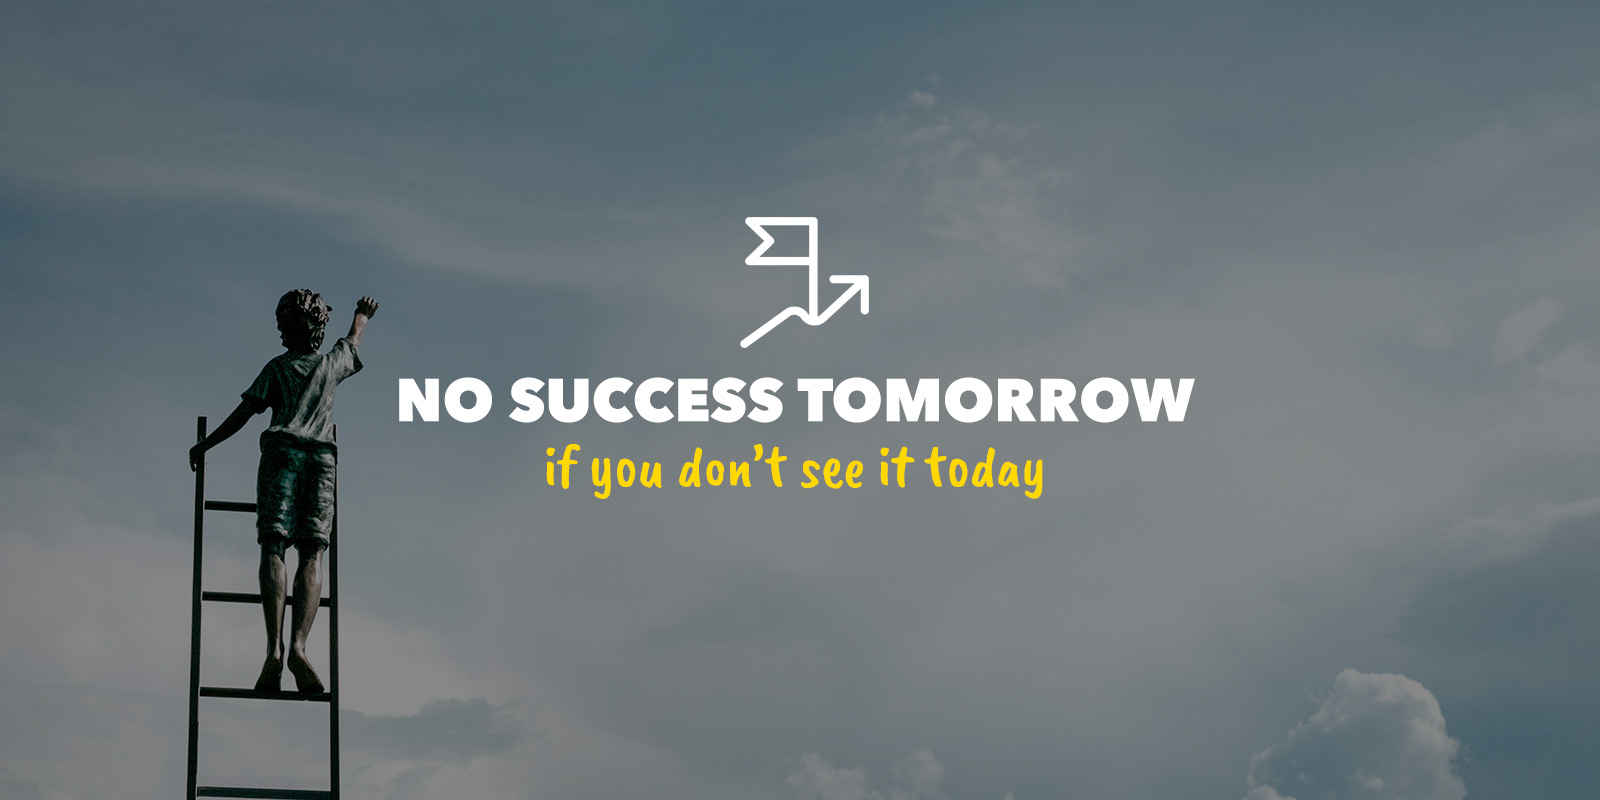 No success tomorrow if you don't see it today